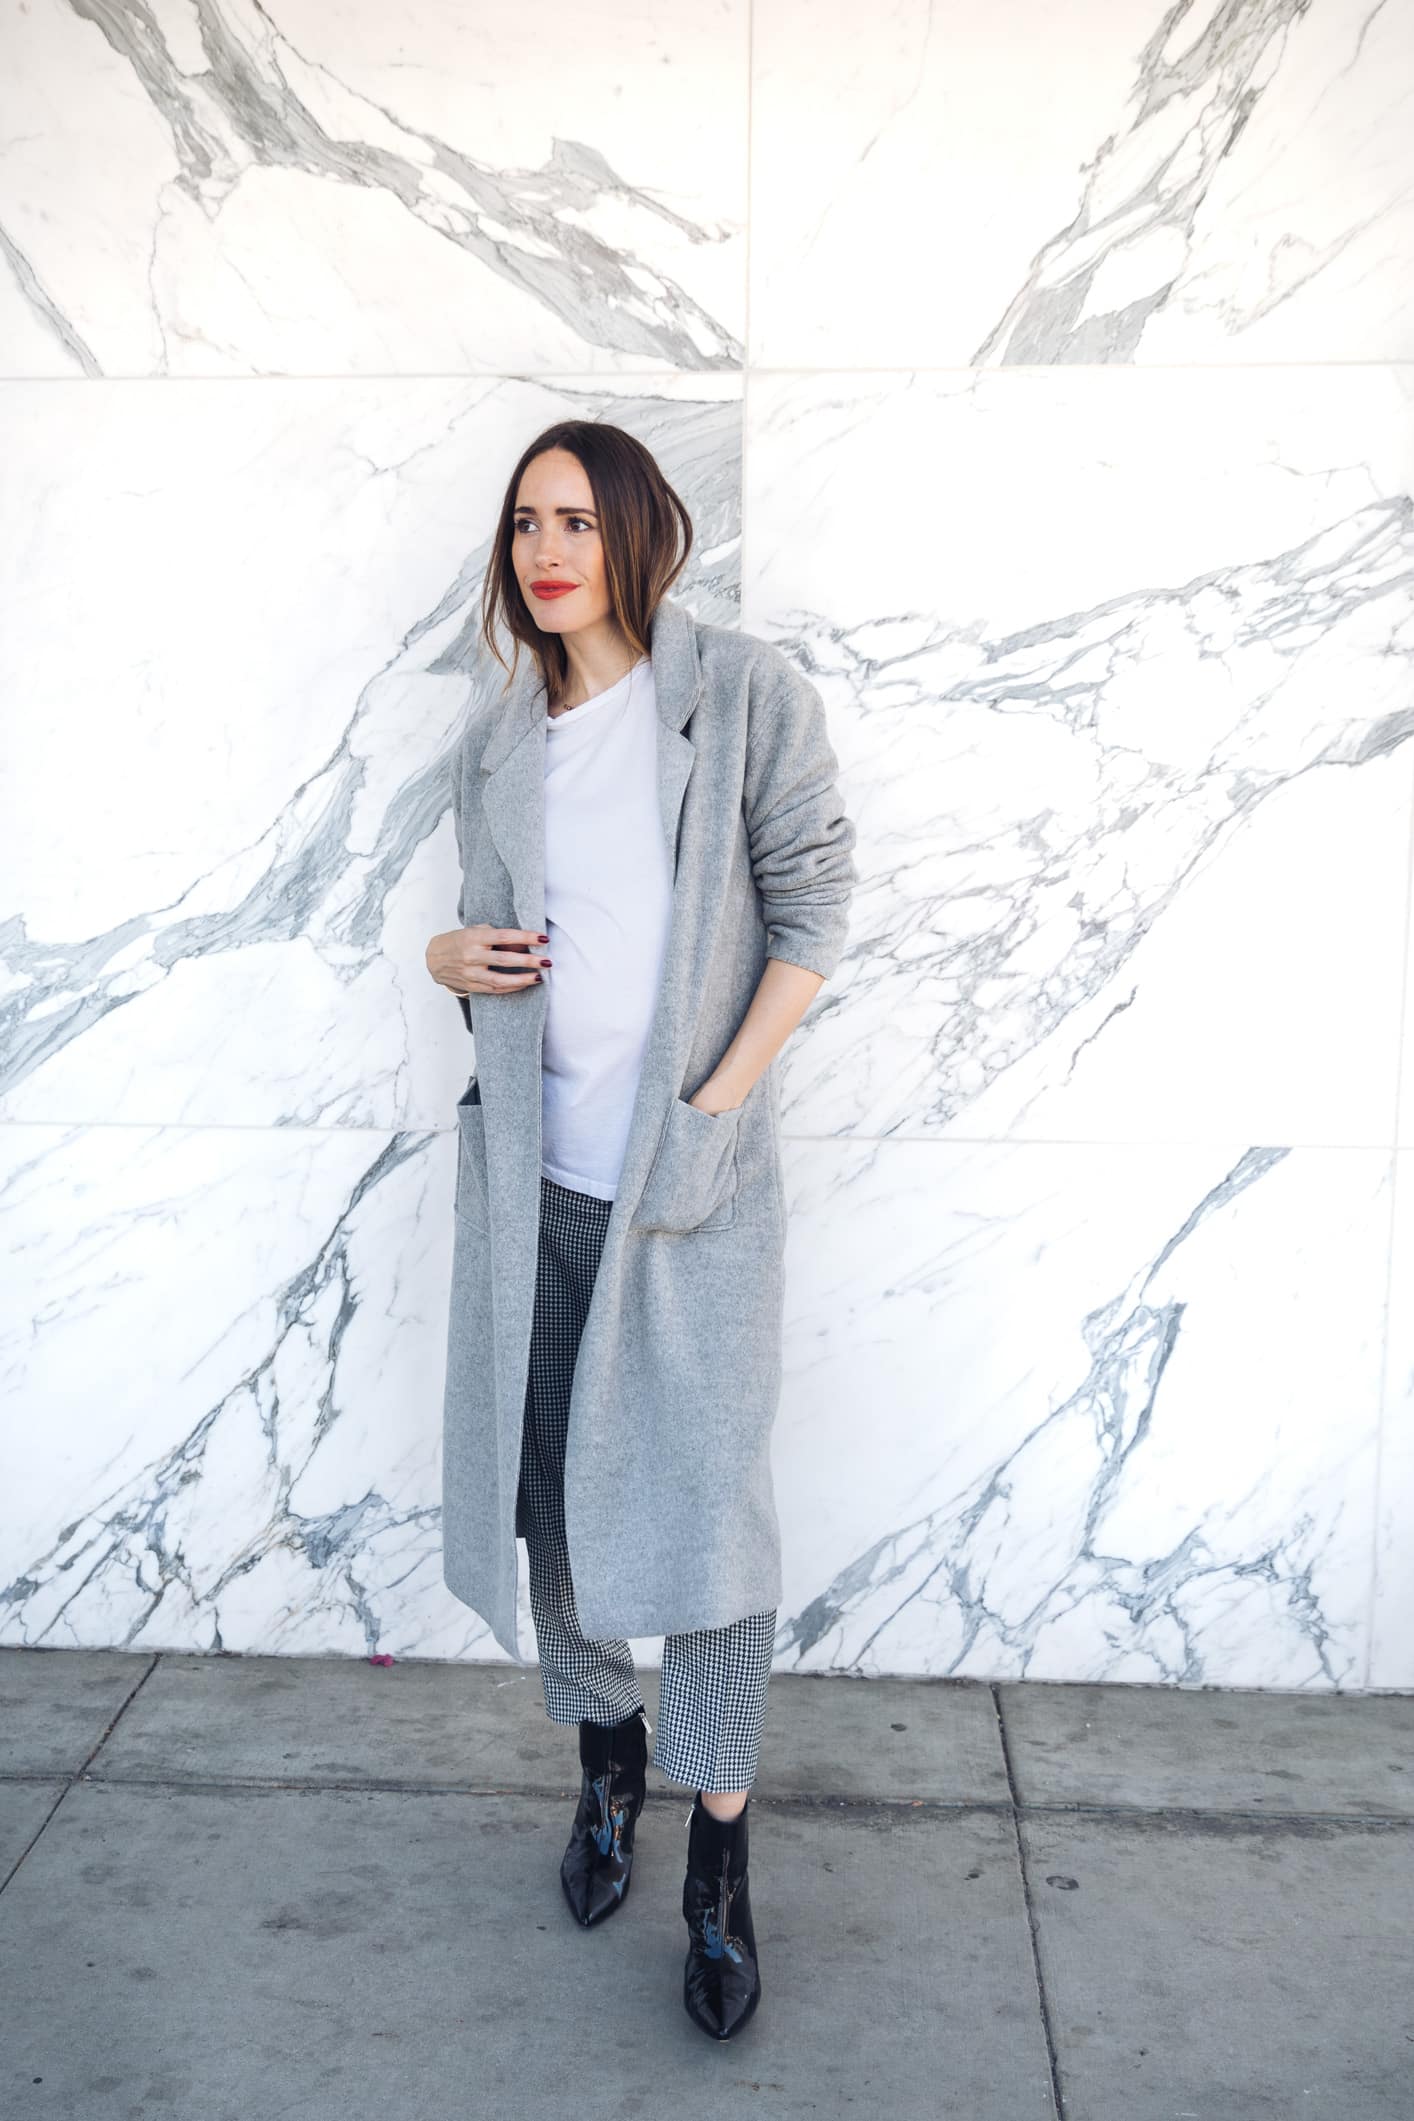 Louise Roe wearing cozy Fall coat in grey and gingham trousers